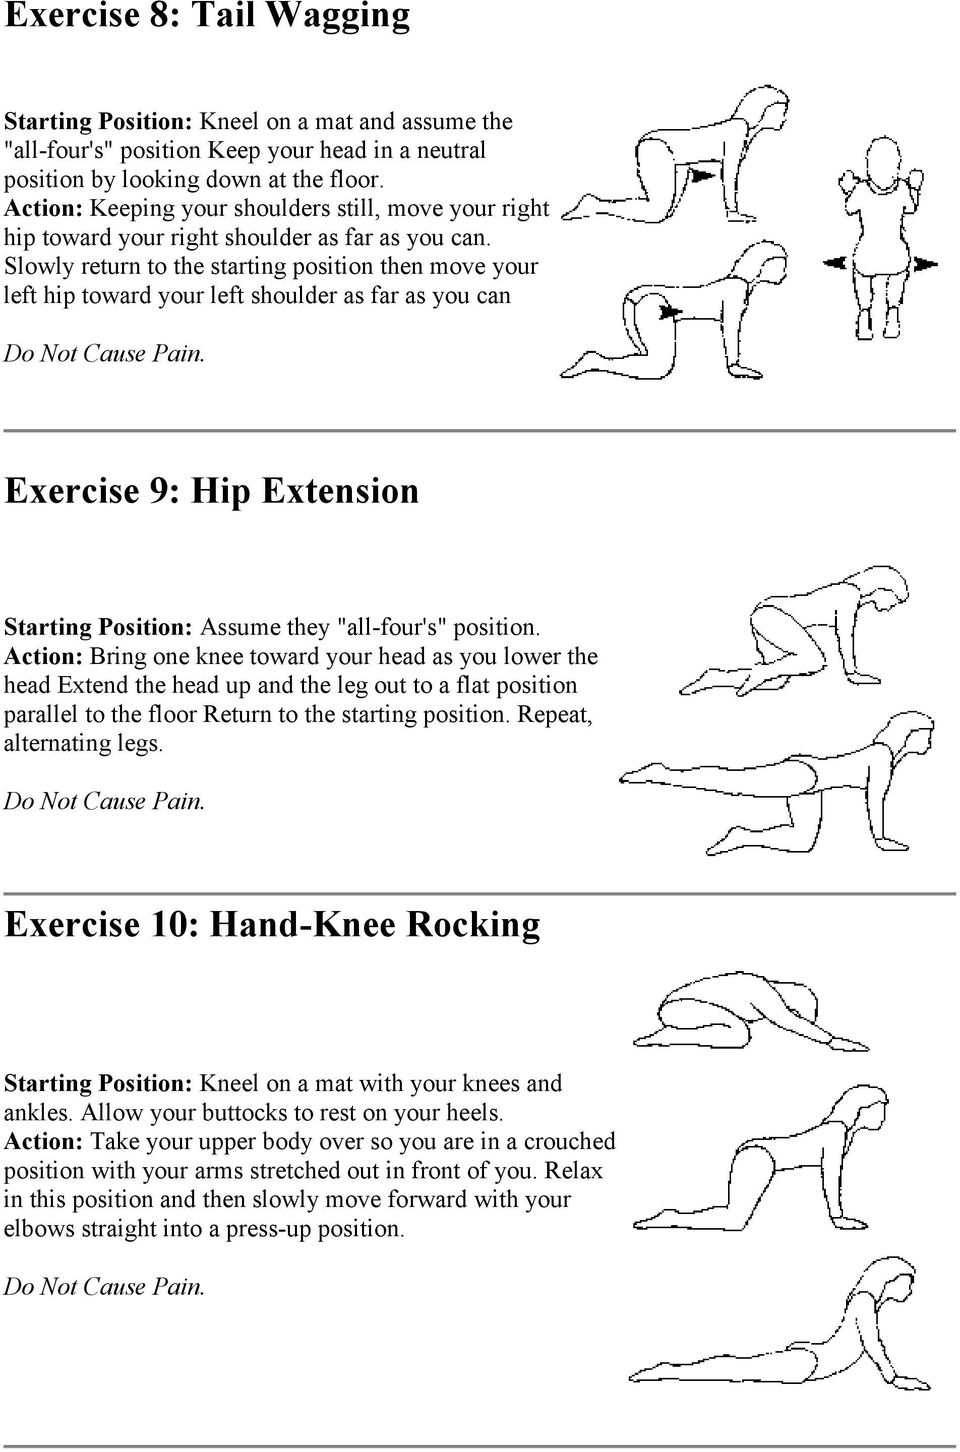 Slowly return to the starting position then move your left hip toward your left shoulder as far as you can Exercise 9: Hip Extension Starting Position: Assume they "all-four's" position.